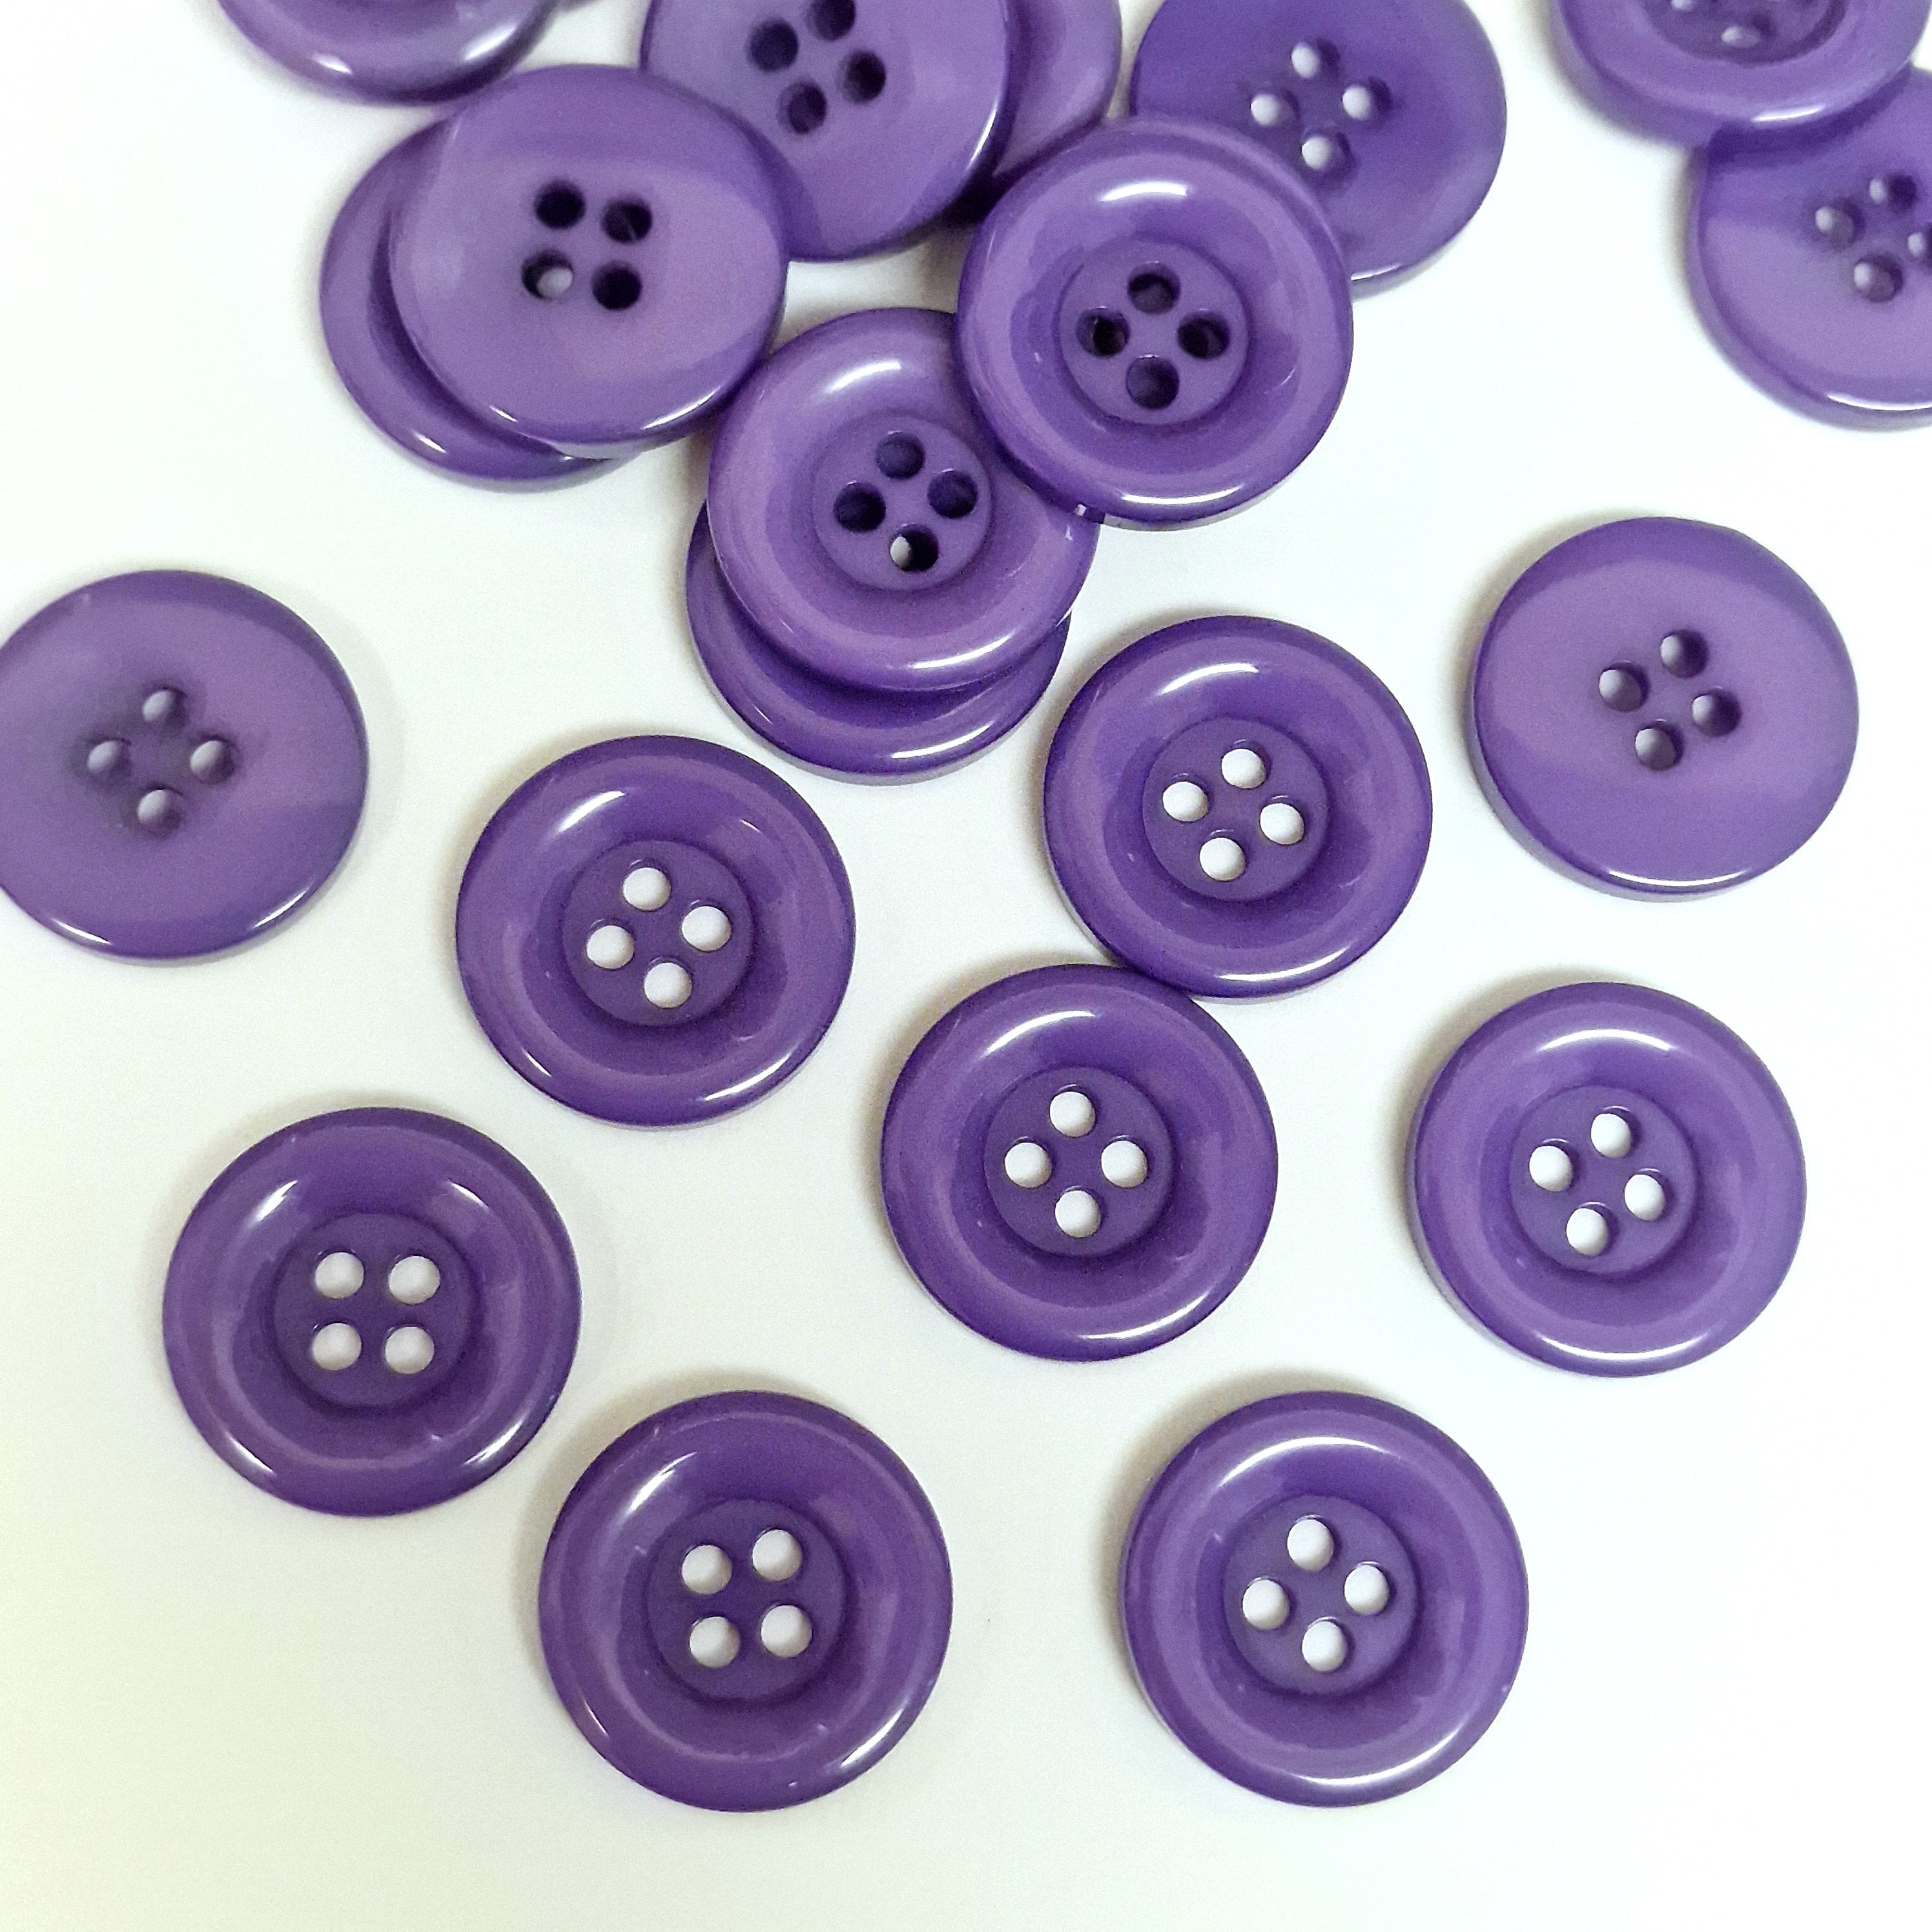 MajorCrafts 48pcs 15mm Purple 4 Holes Thick Edge Round Resin Sewing Buttons